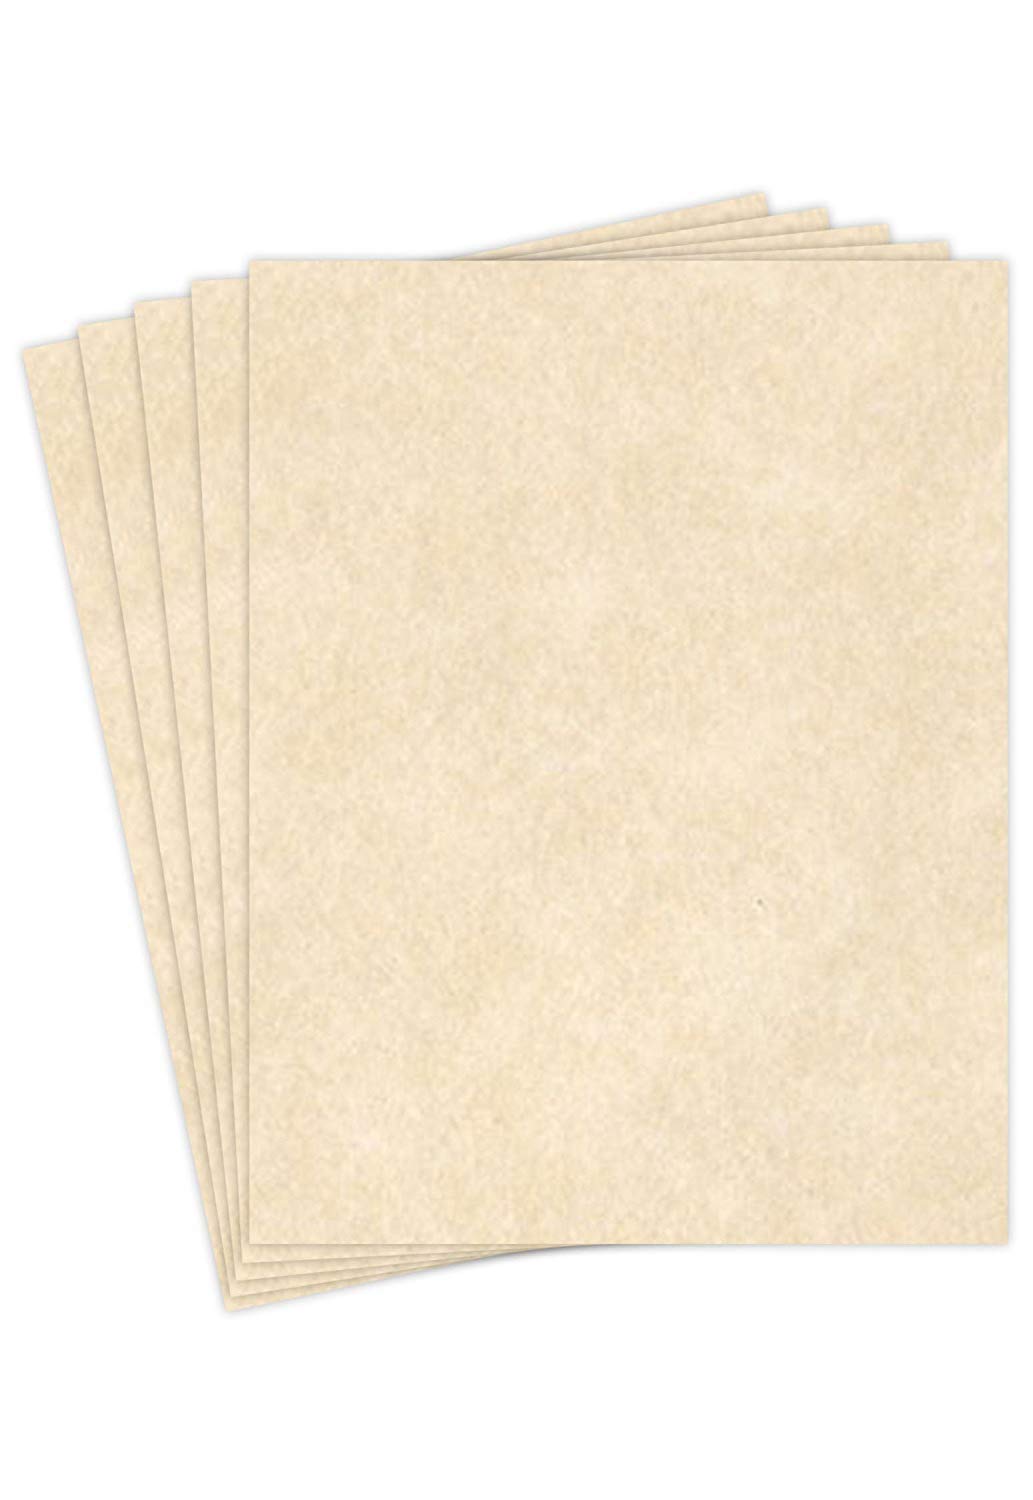 Natural Imitation Parchment Paper Great for Writing Certificates Menus  Brochures and Wedding Invitations, Premium Quality 24Lb Paper, 8.5 x 11  Letter Size